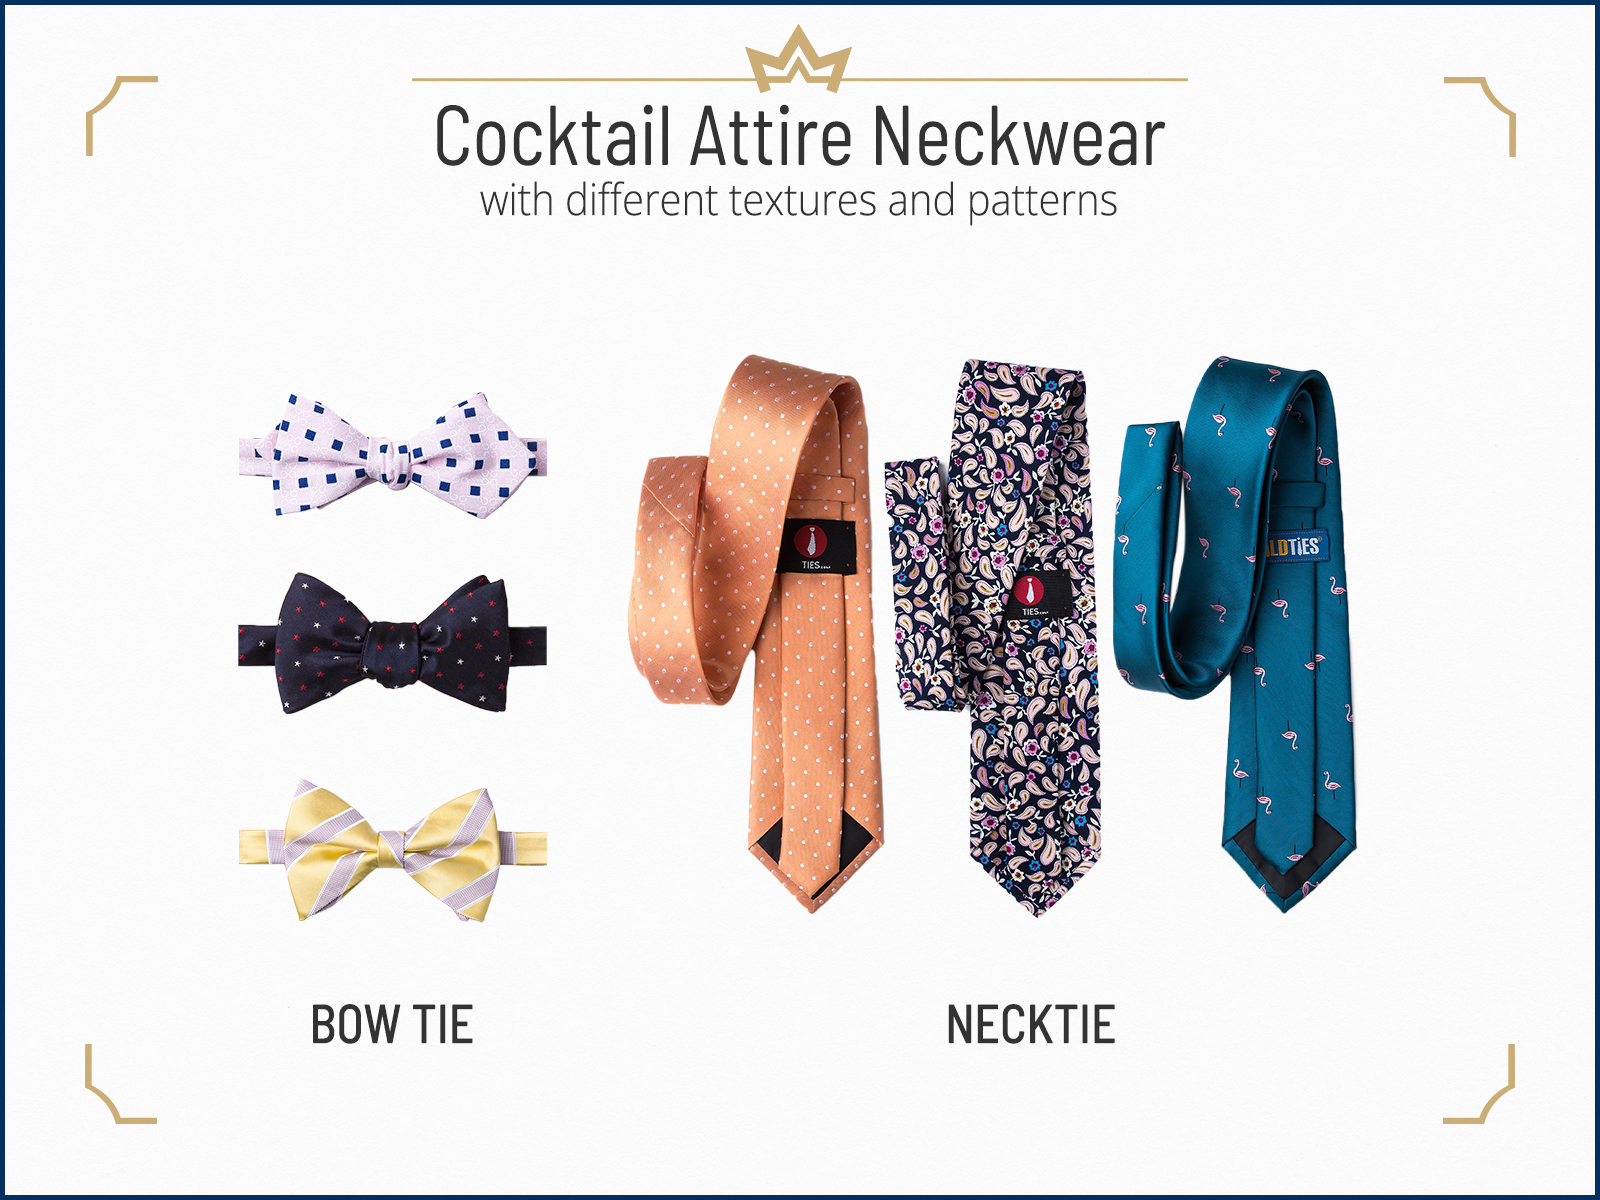 Recommended ties and neckwear for cocktail attire